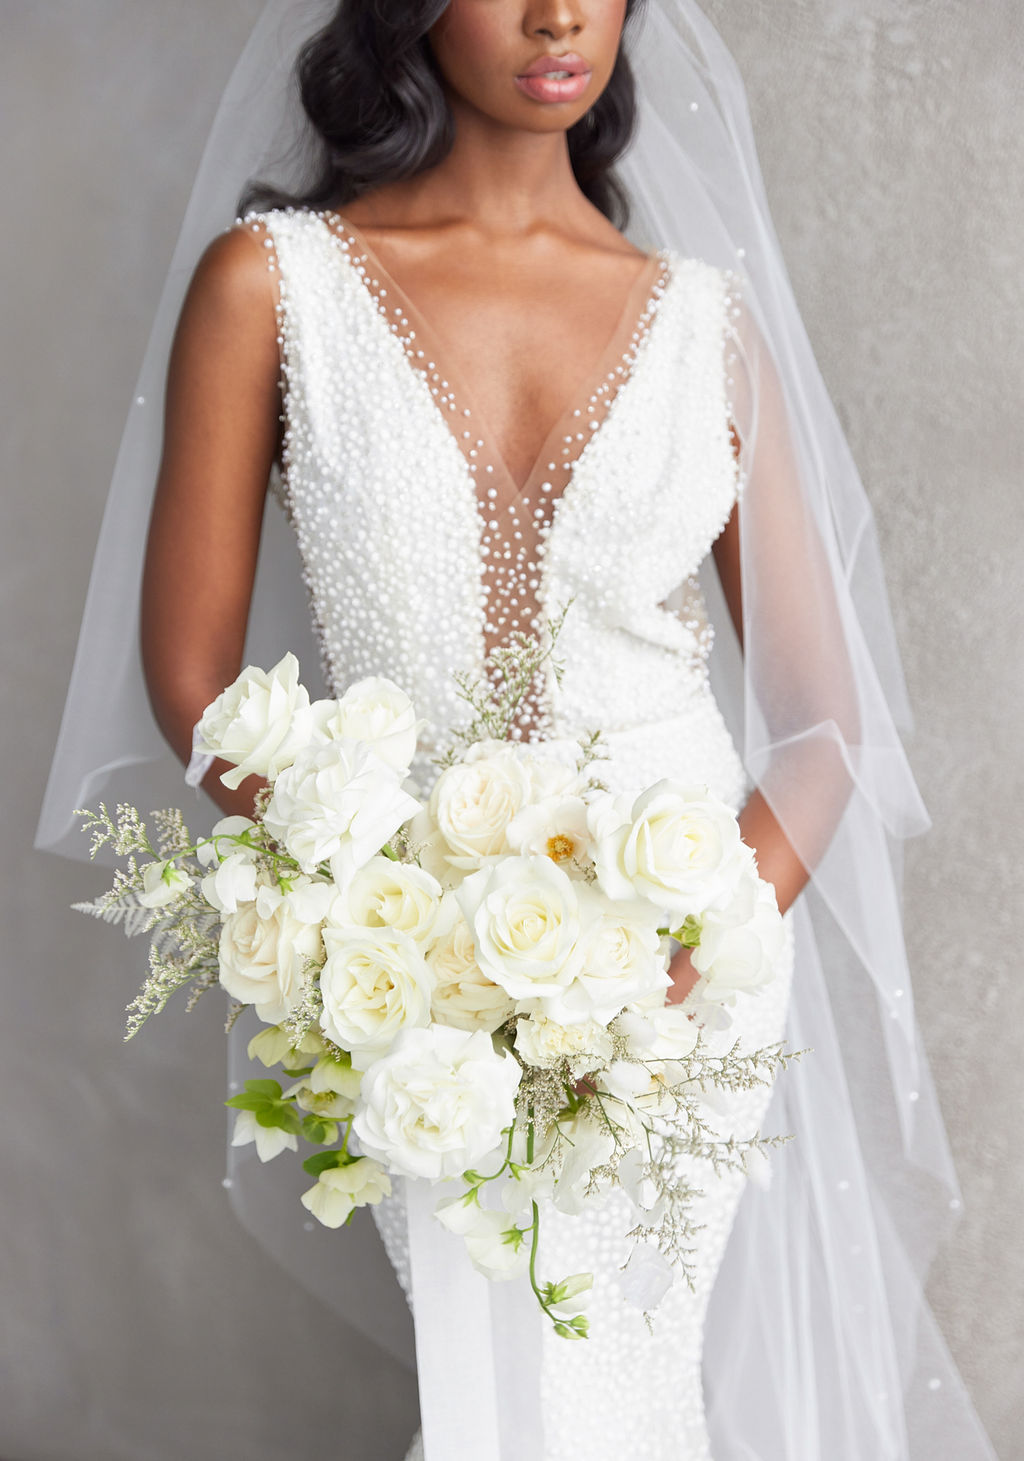 Bride wearing a wedding dress and holding a white rose bouqet